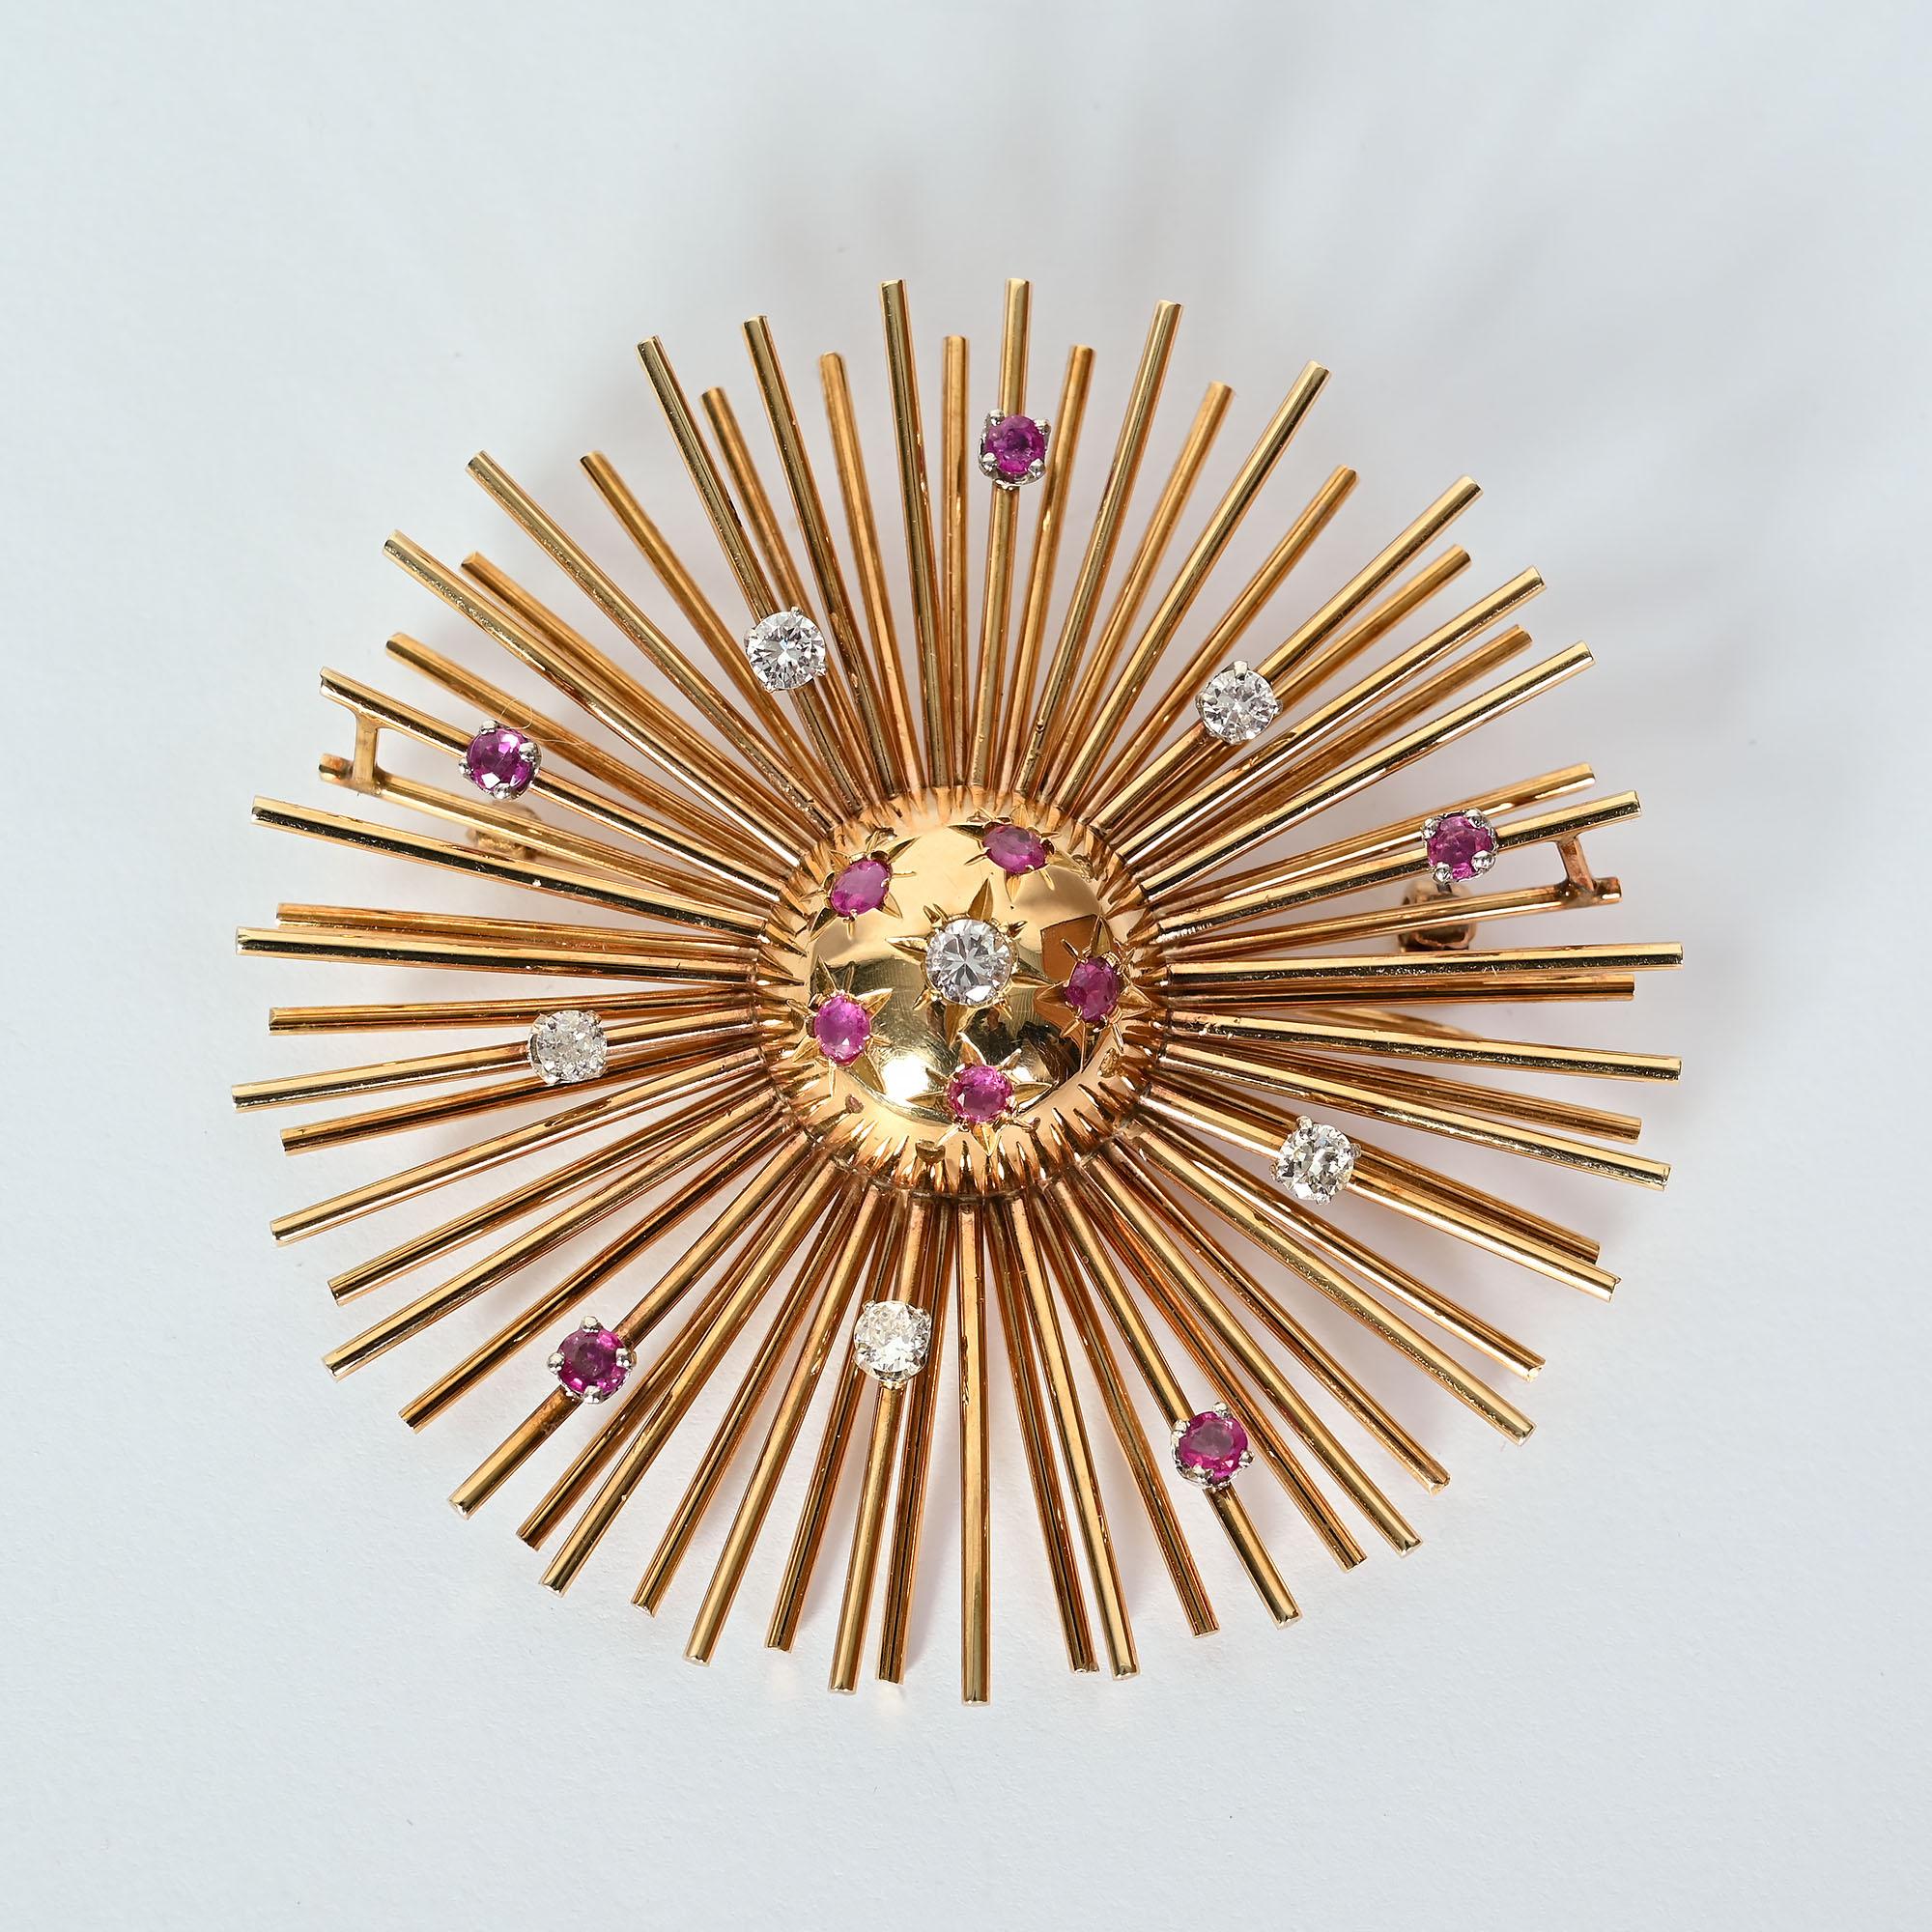 Wonderfully Retro Sunburst brooch in 14 karat rose gold. The brooch has five round brilliant cut diamonds with a total weight of approximately .84 carats; G color. Ten round rubies weigh approximately 19.65 dwt. The center is domed giving nice